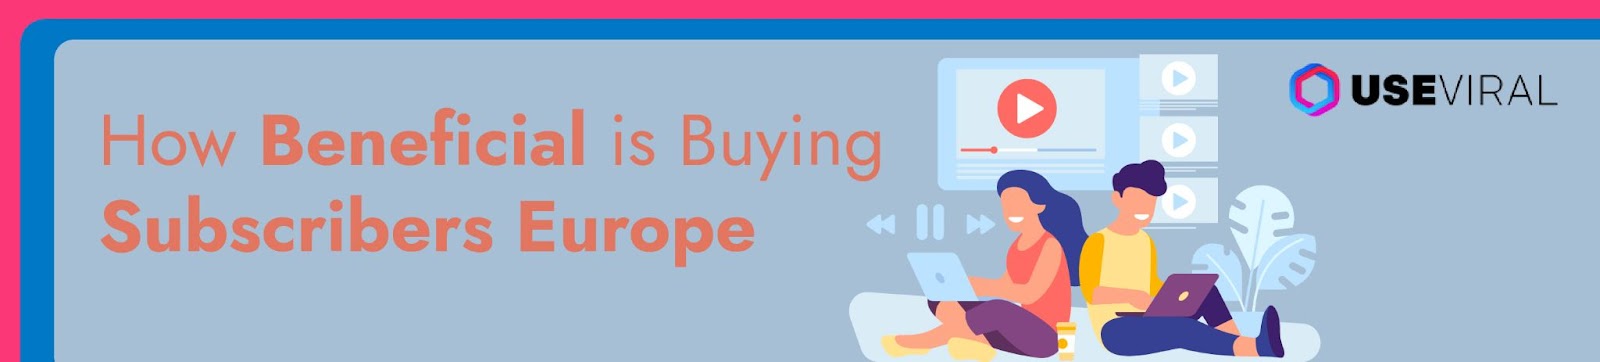 How Beneficial is Buying Subscribers Europe